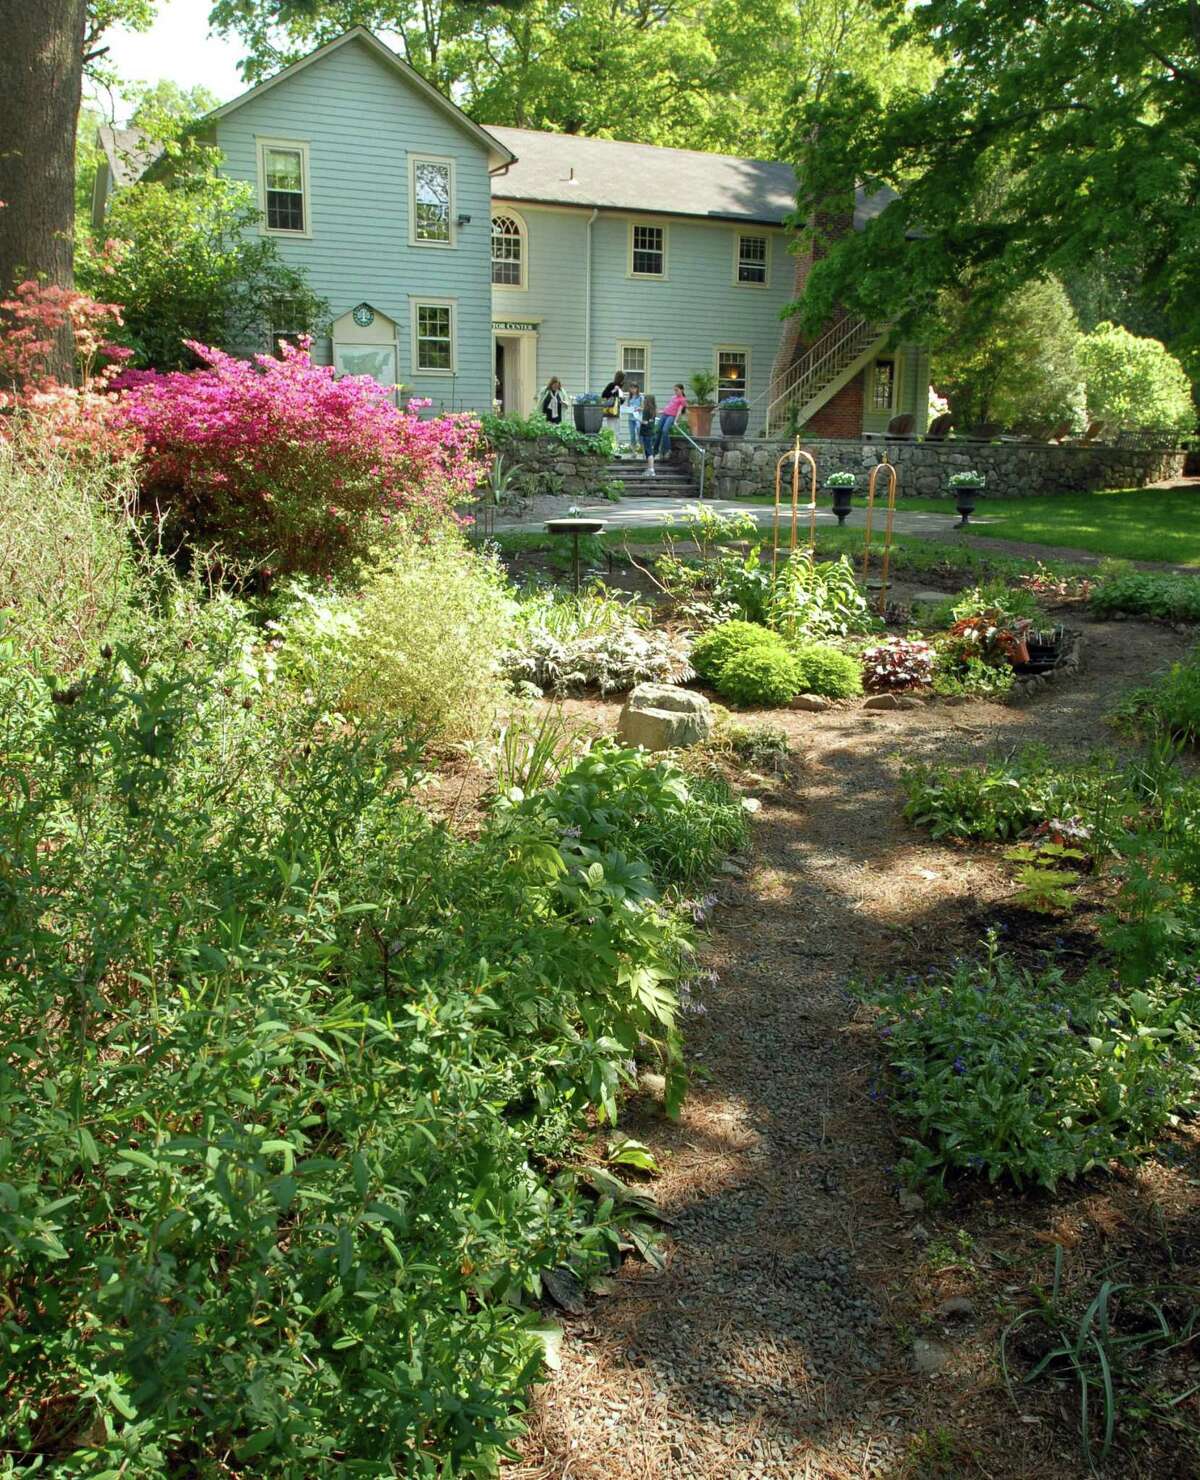 The cottage garden in front of the visitor center at Bartlett Arboretum and Gardens is full of blooming flowers.